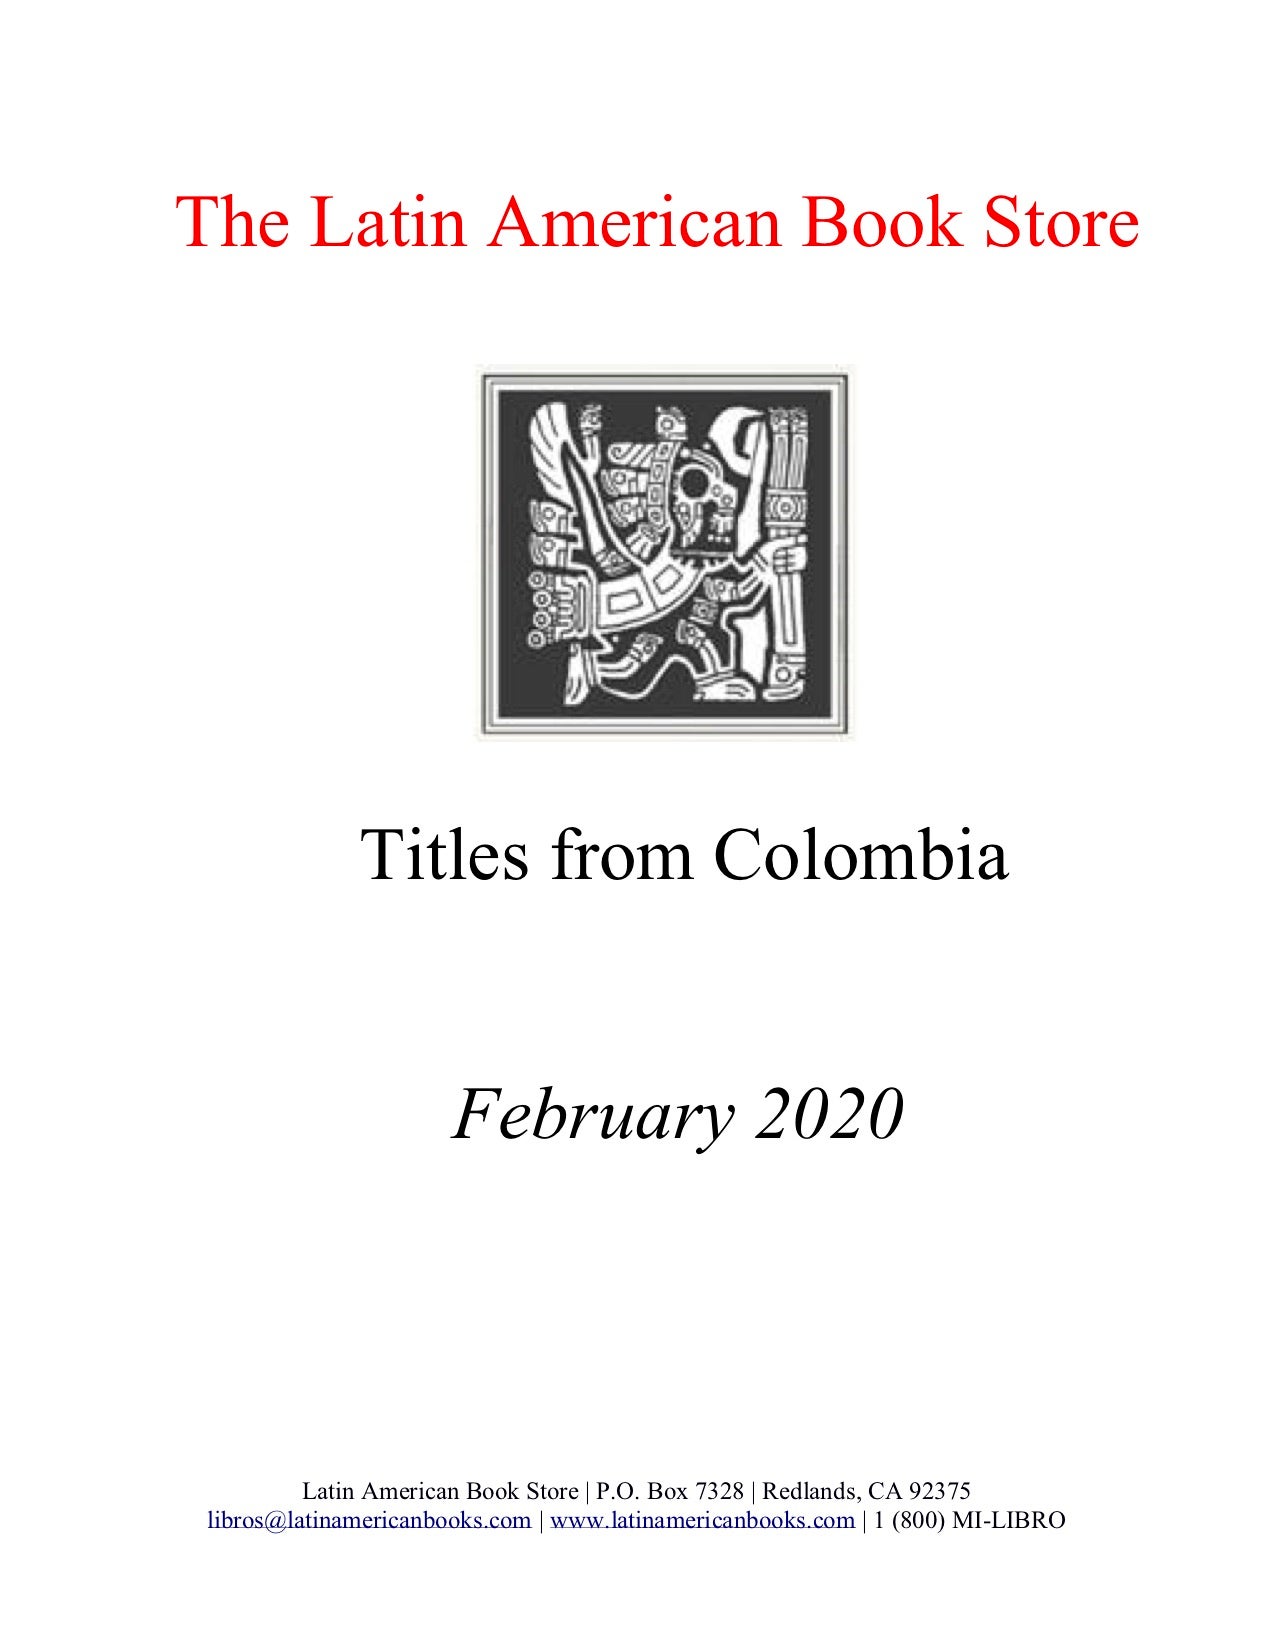 Colombian Titles -- February 2020